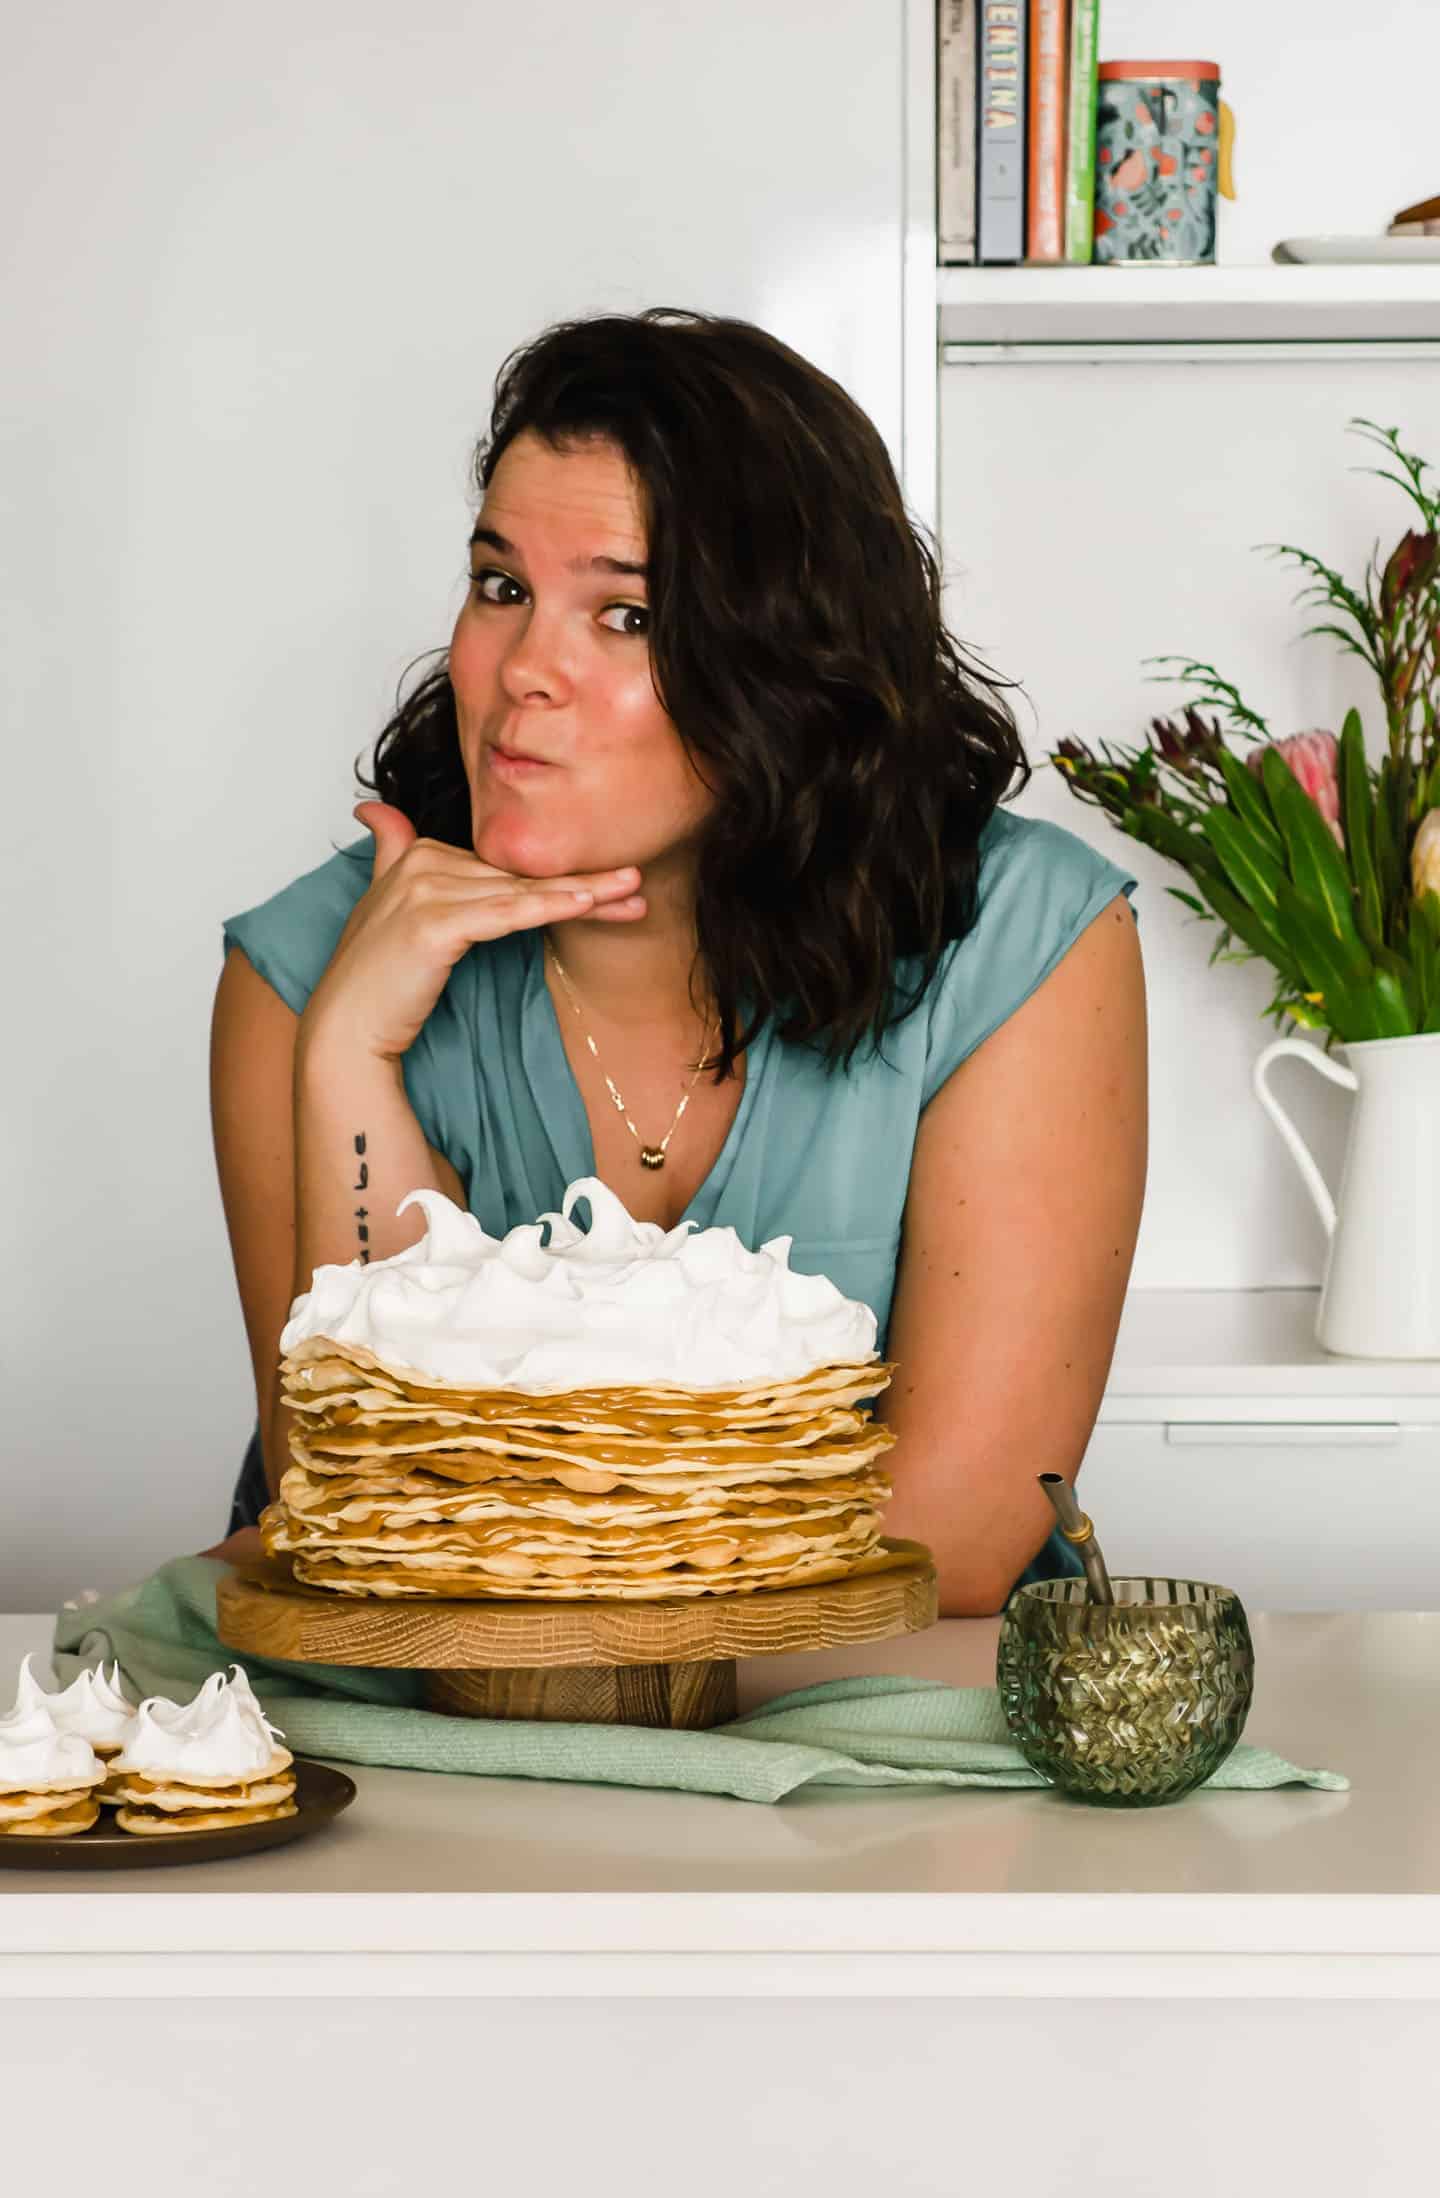 Headshot with a rogel cake, a mate, in a white kitchen